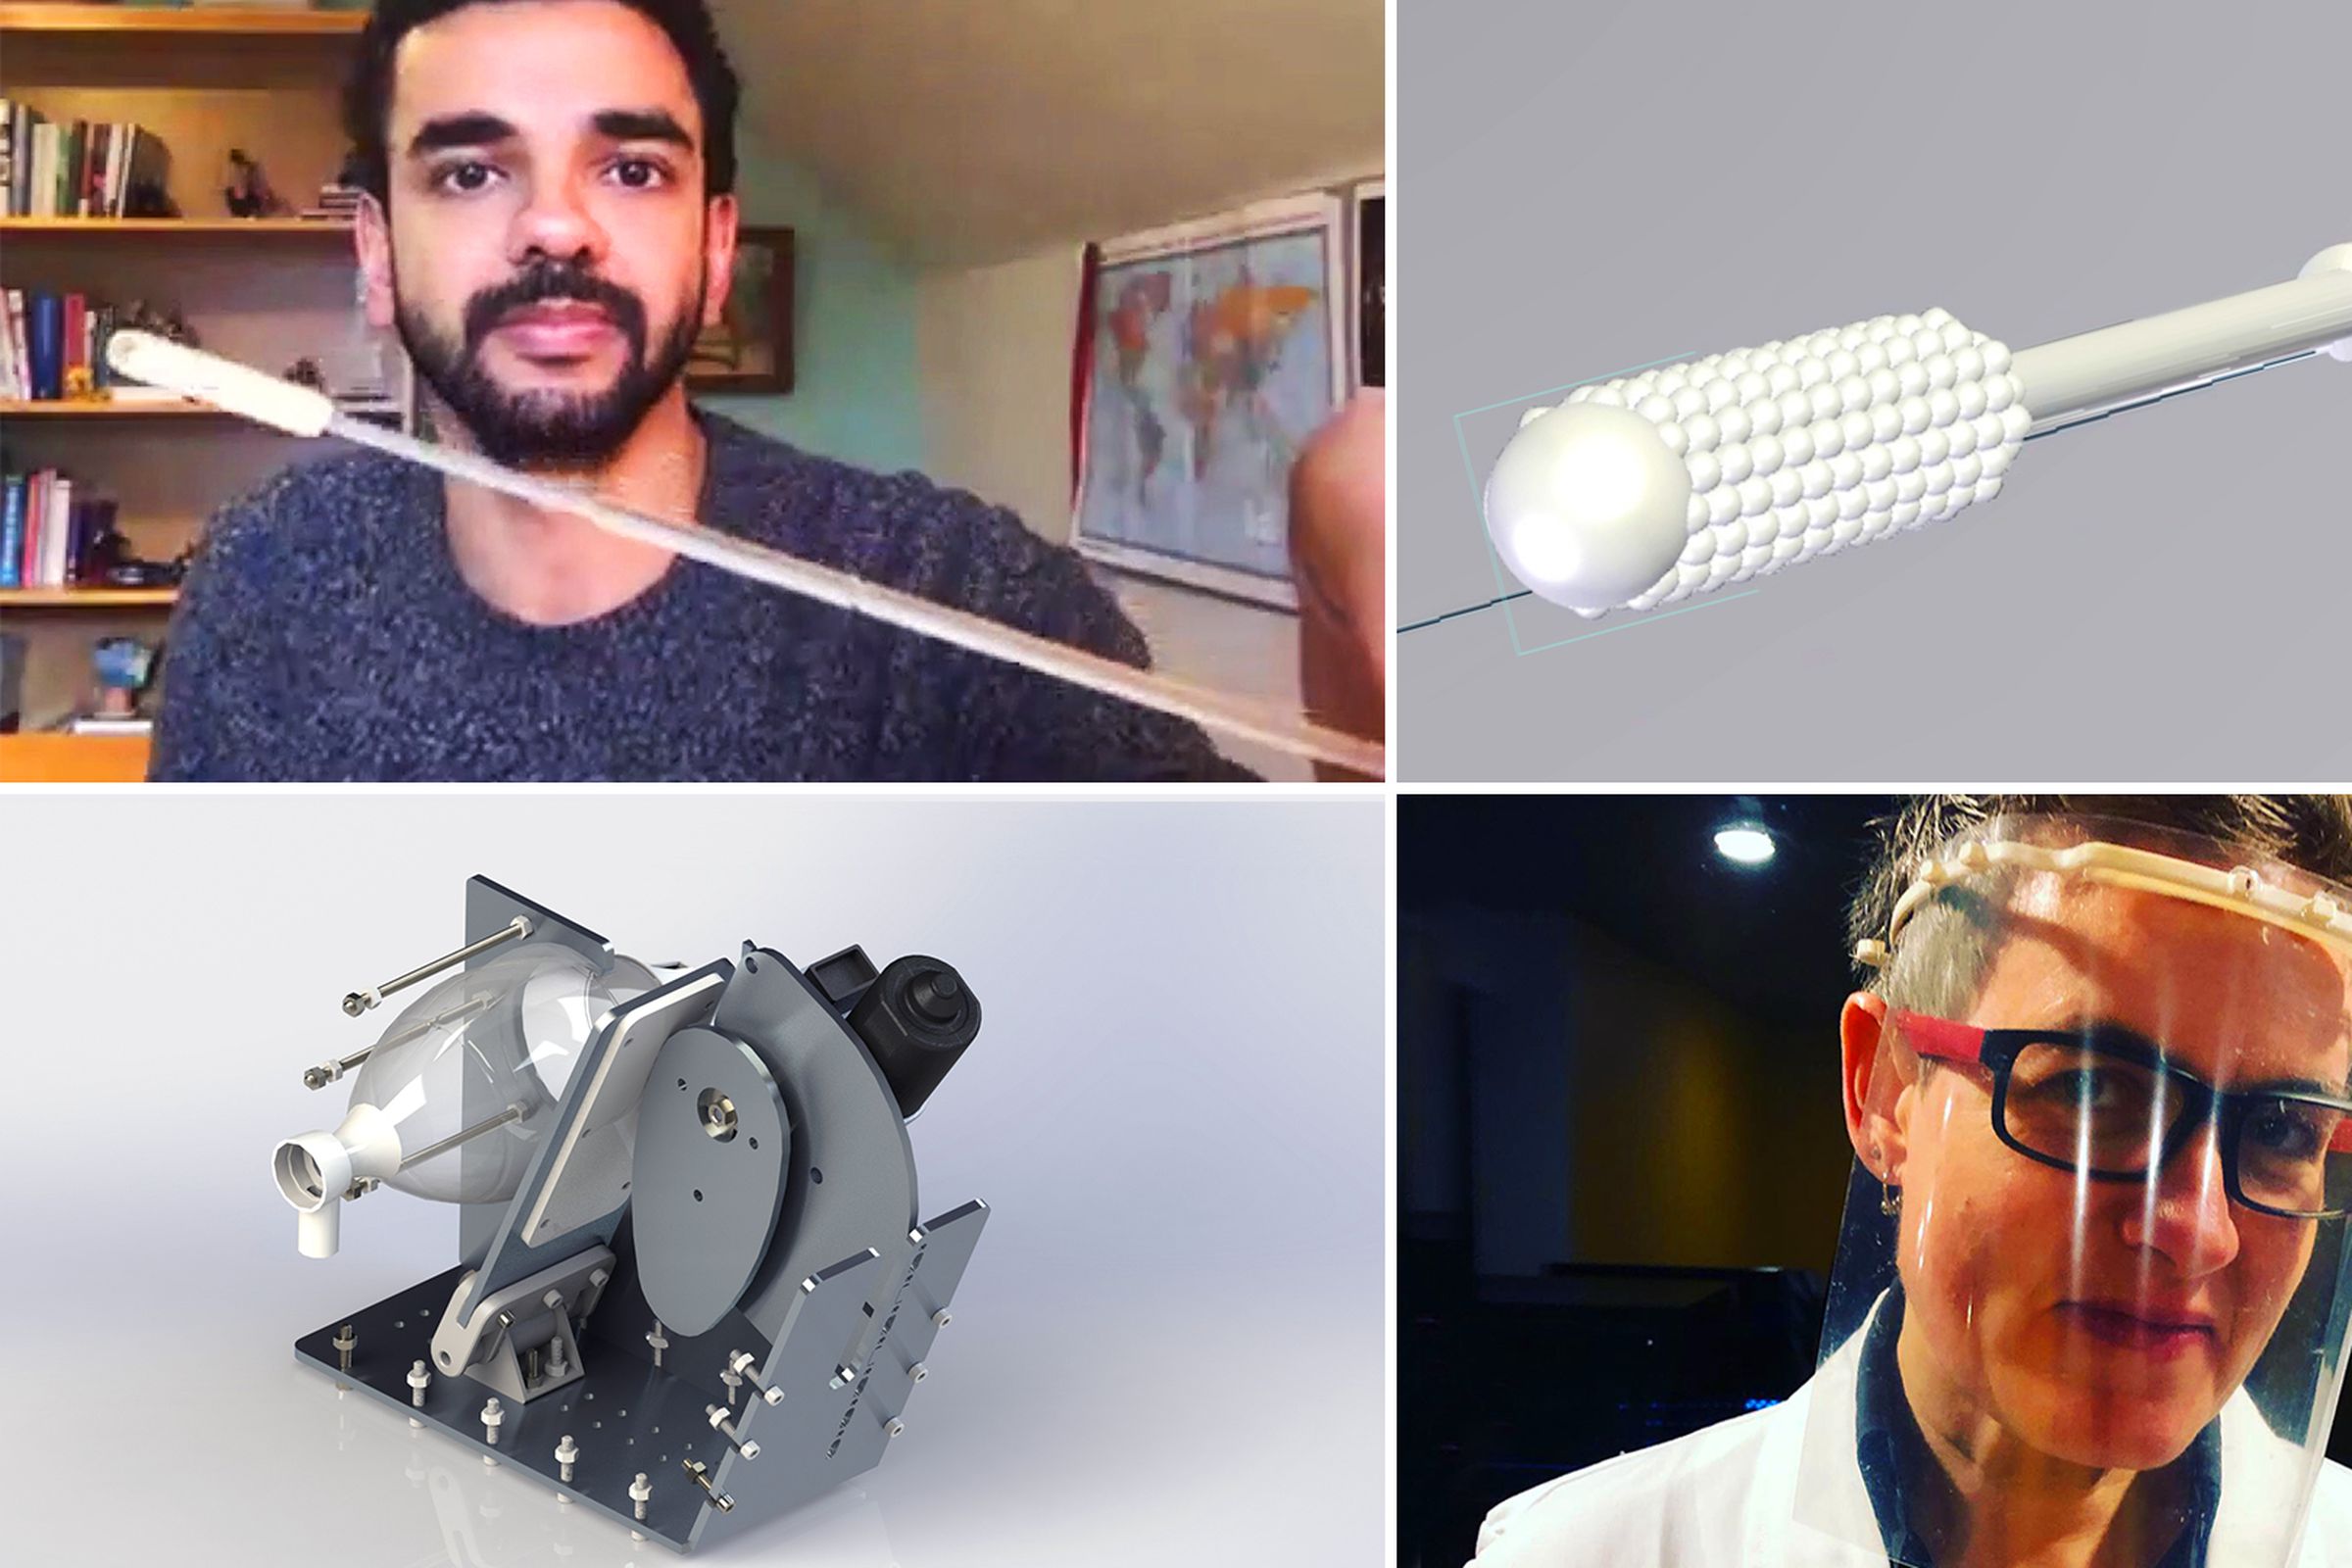 A montage of makers holding the medical equipment they made, and computer renderings of the equipment.